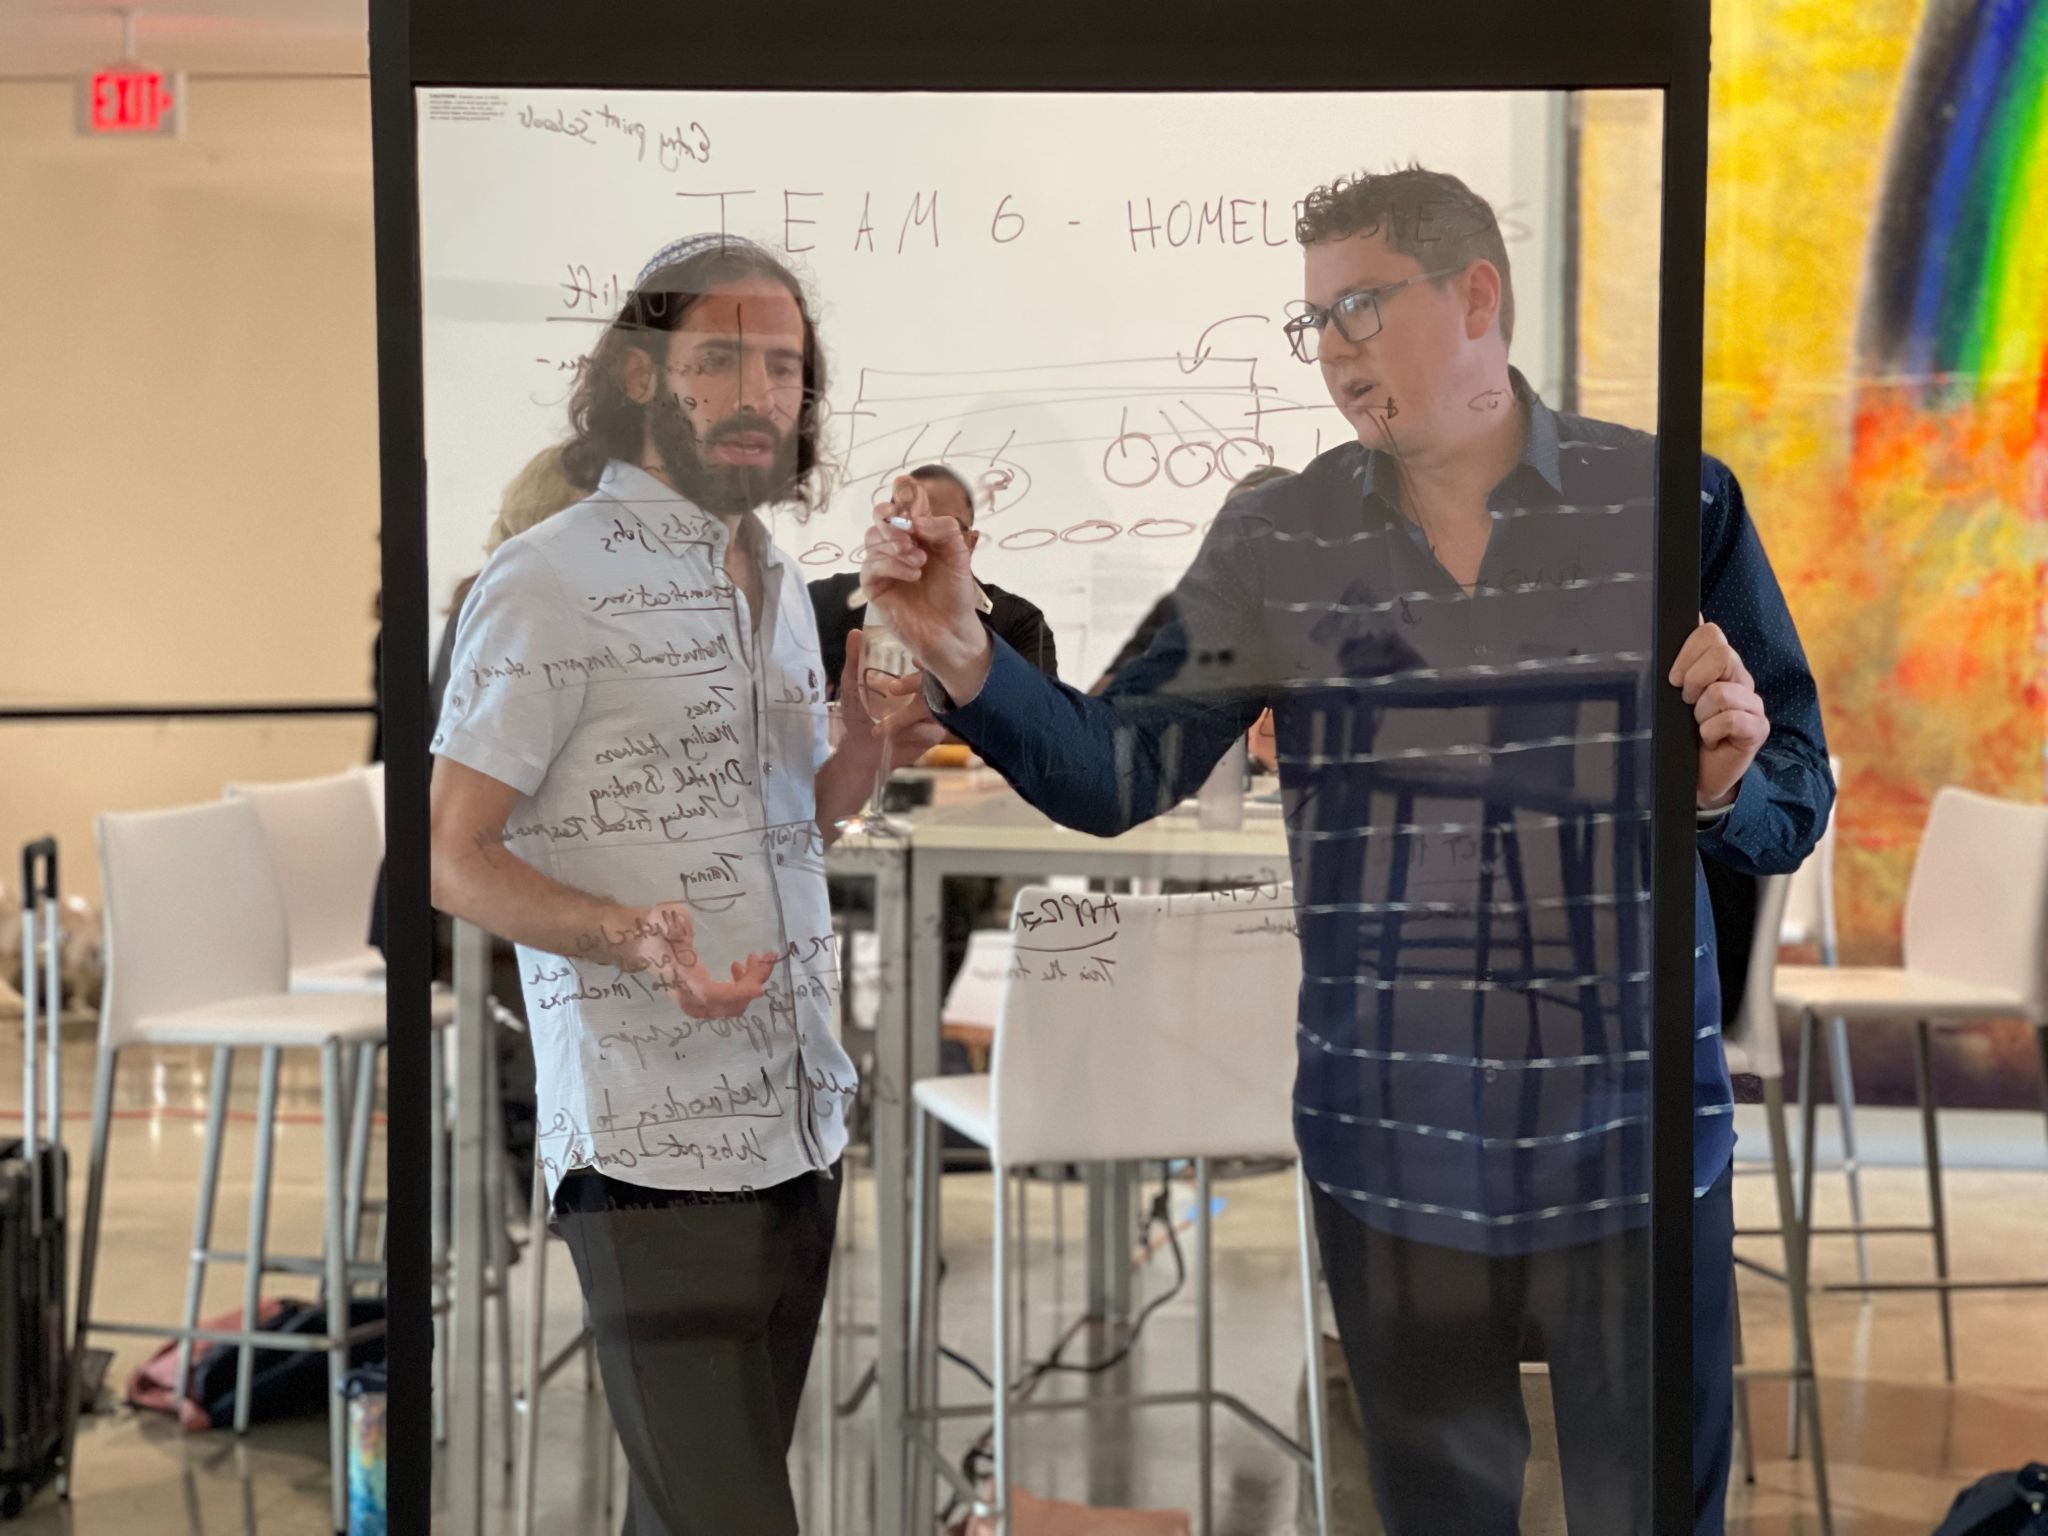 Why your Q1 Marketing Plan Should Include Video Content Man writing on clear board with marker while another man holding a glass of wine looks on